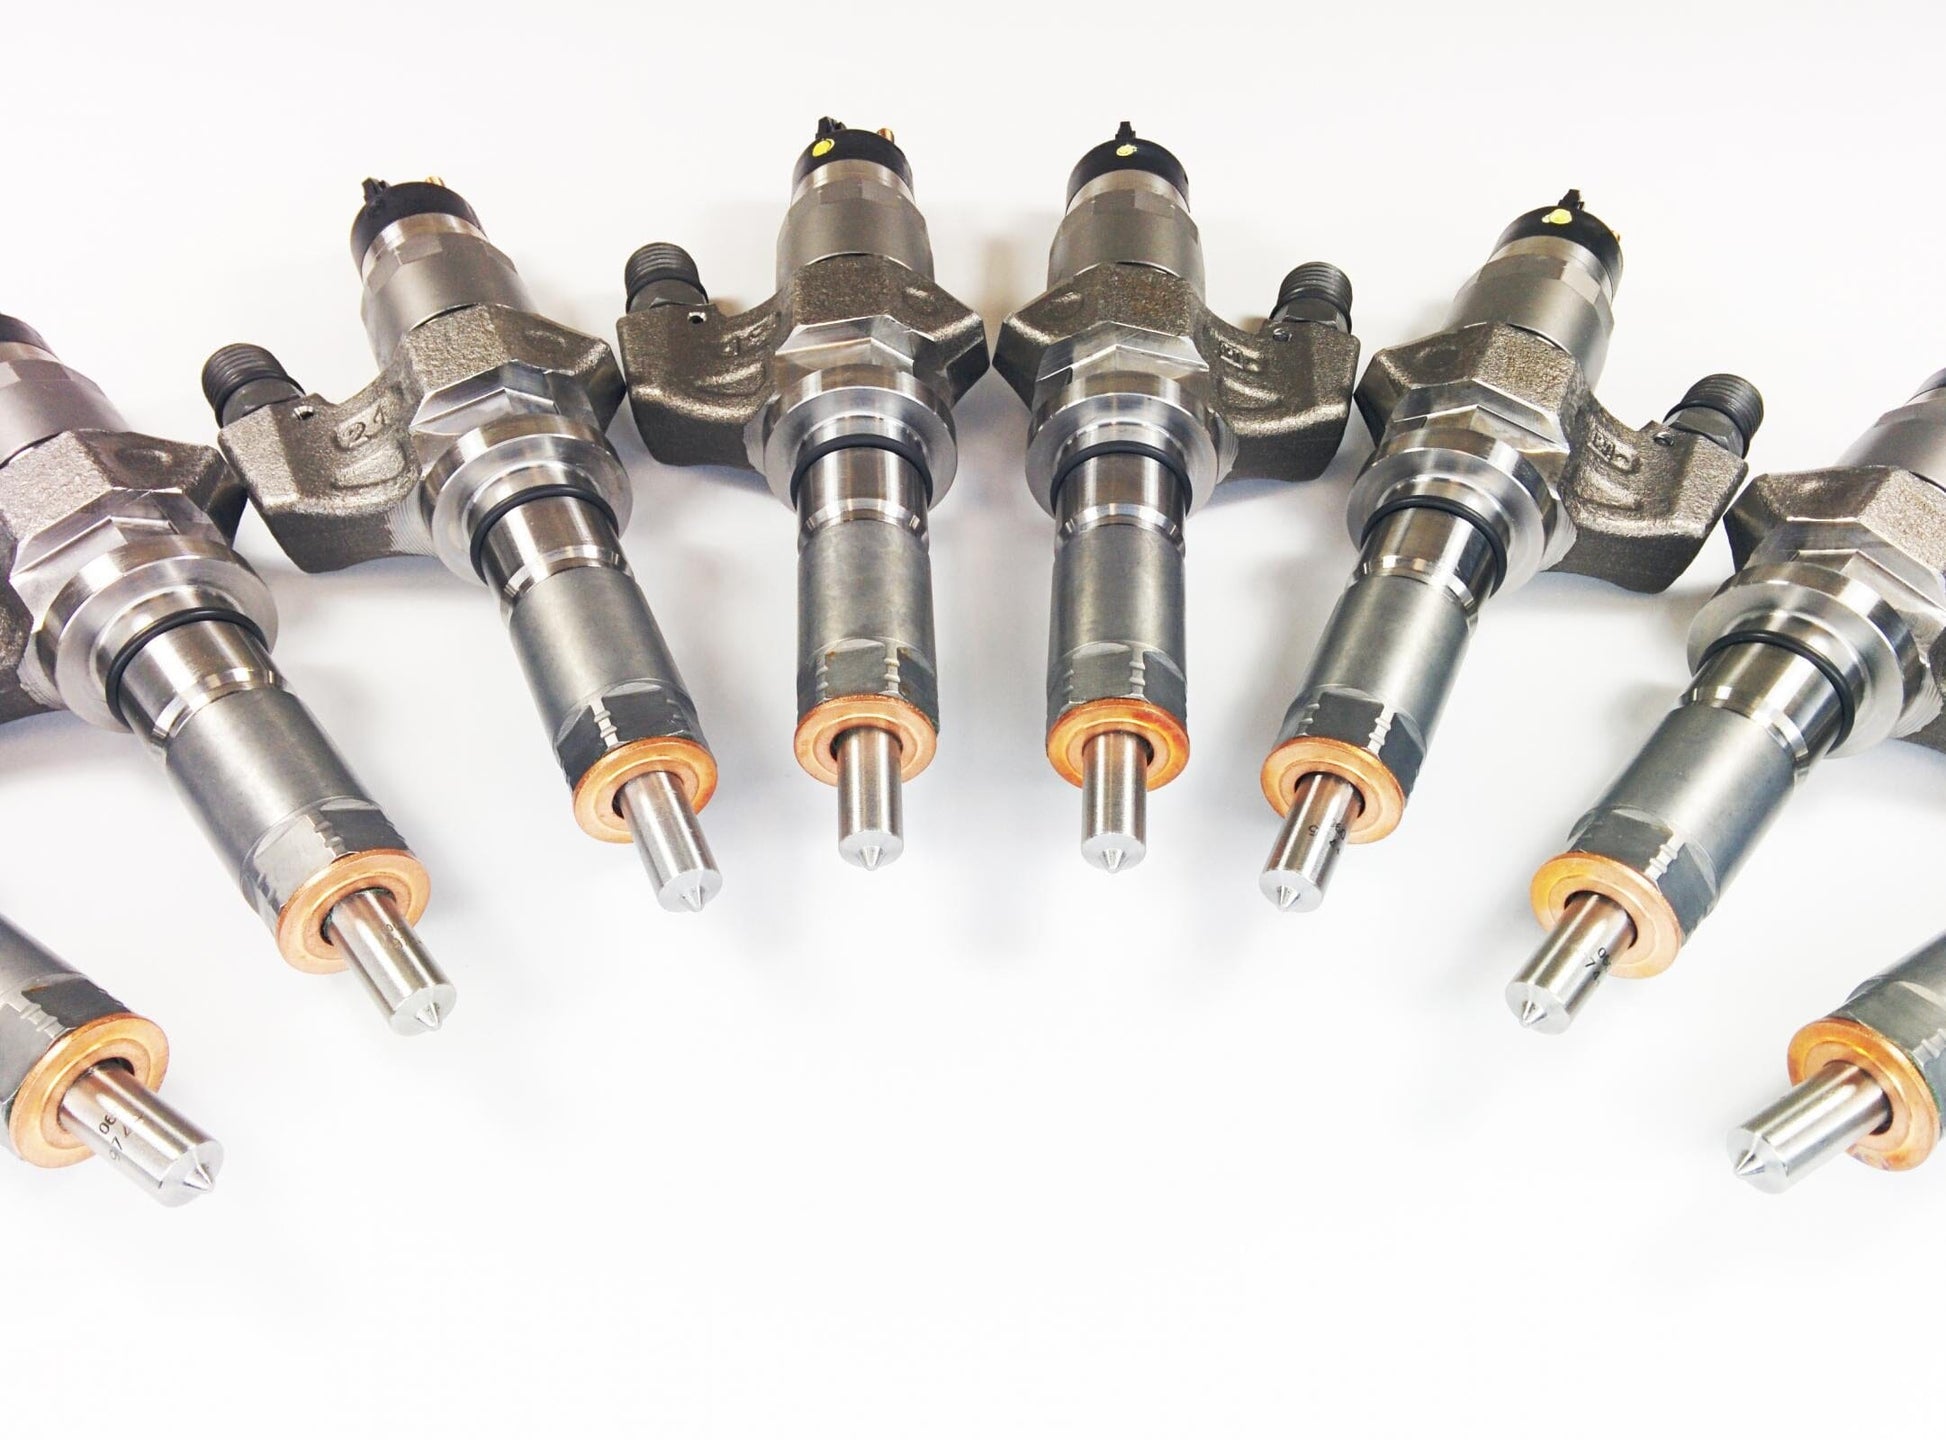 Brand New Injector Set - 100% Over - SAC Nozzle (Duramax 01-04 LB7) Fuel Injector Dynomite Diesel 